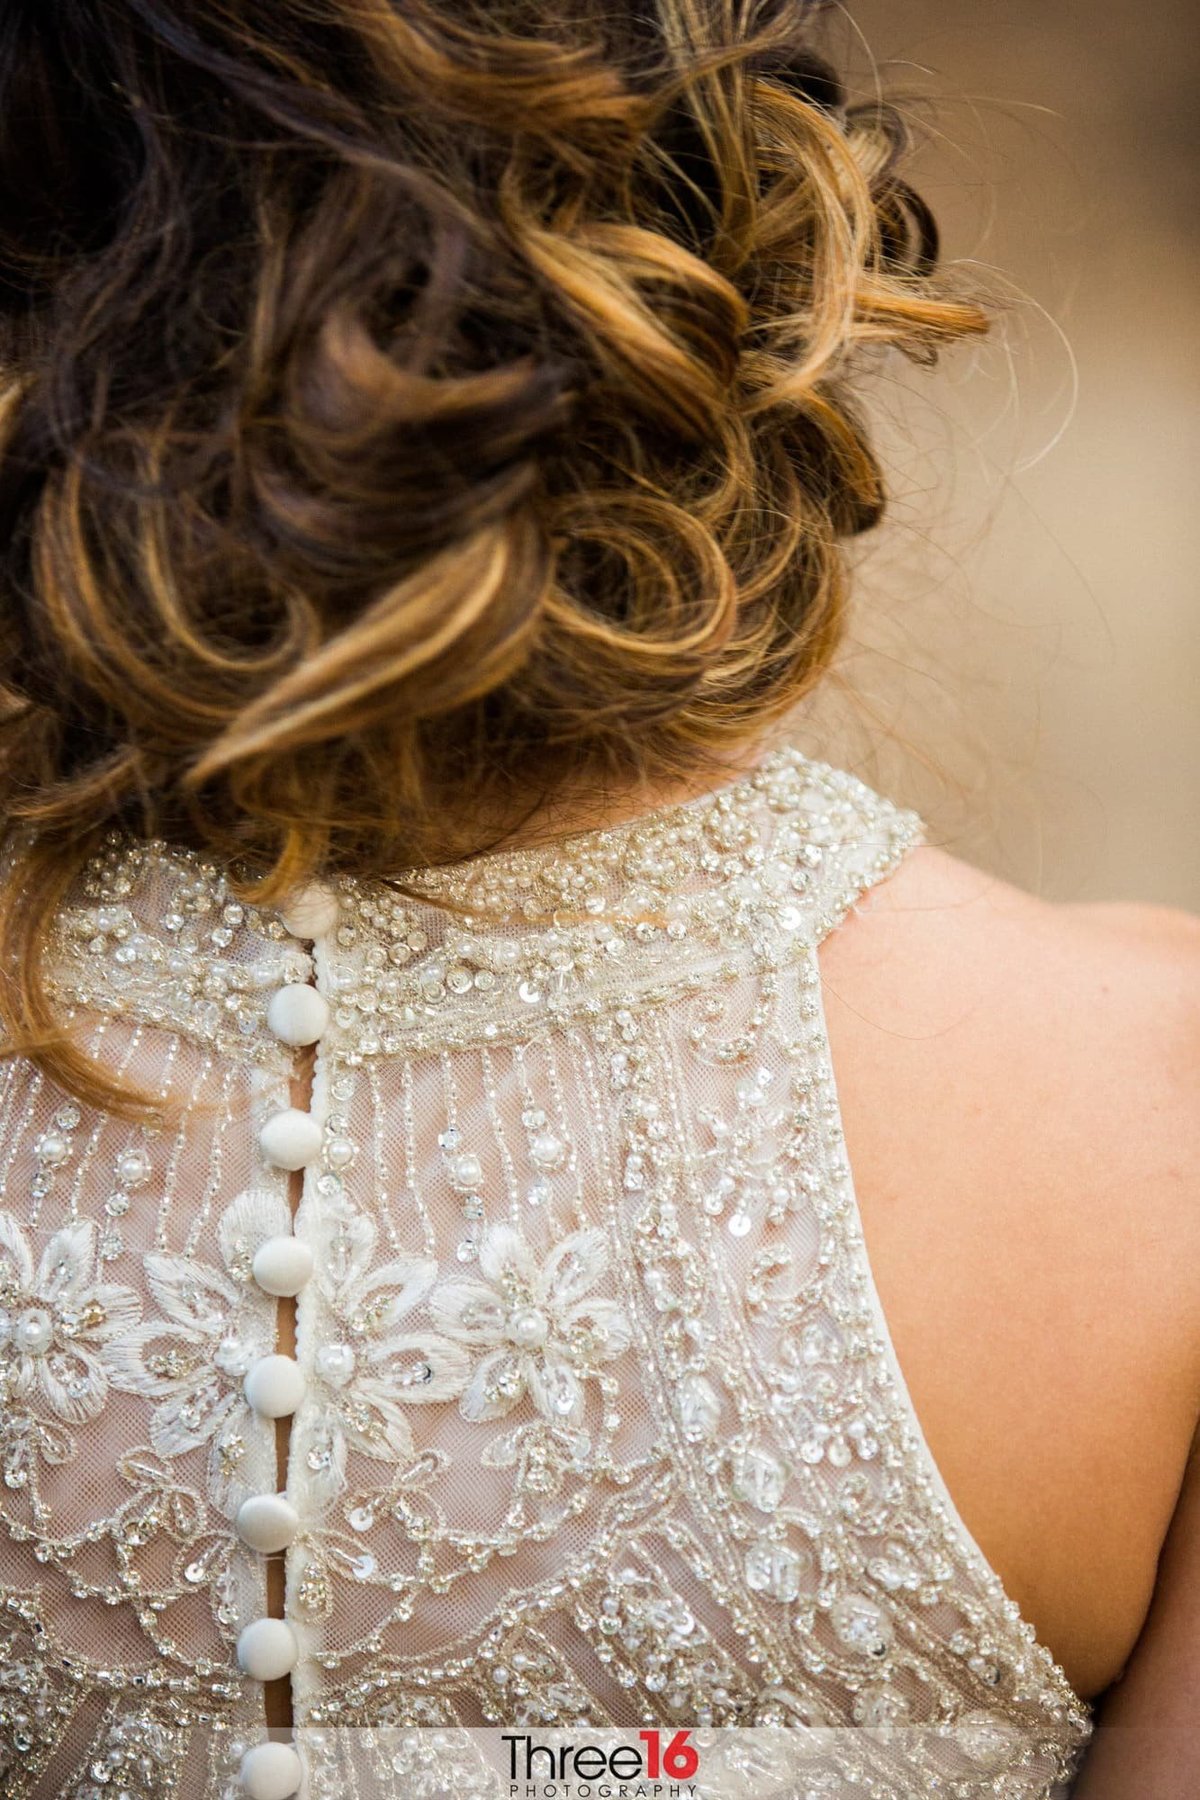 The back of the Bride's dress